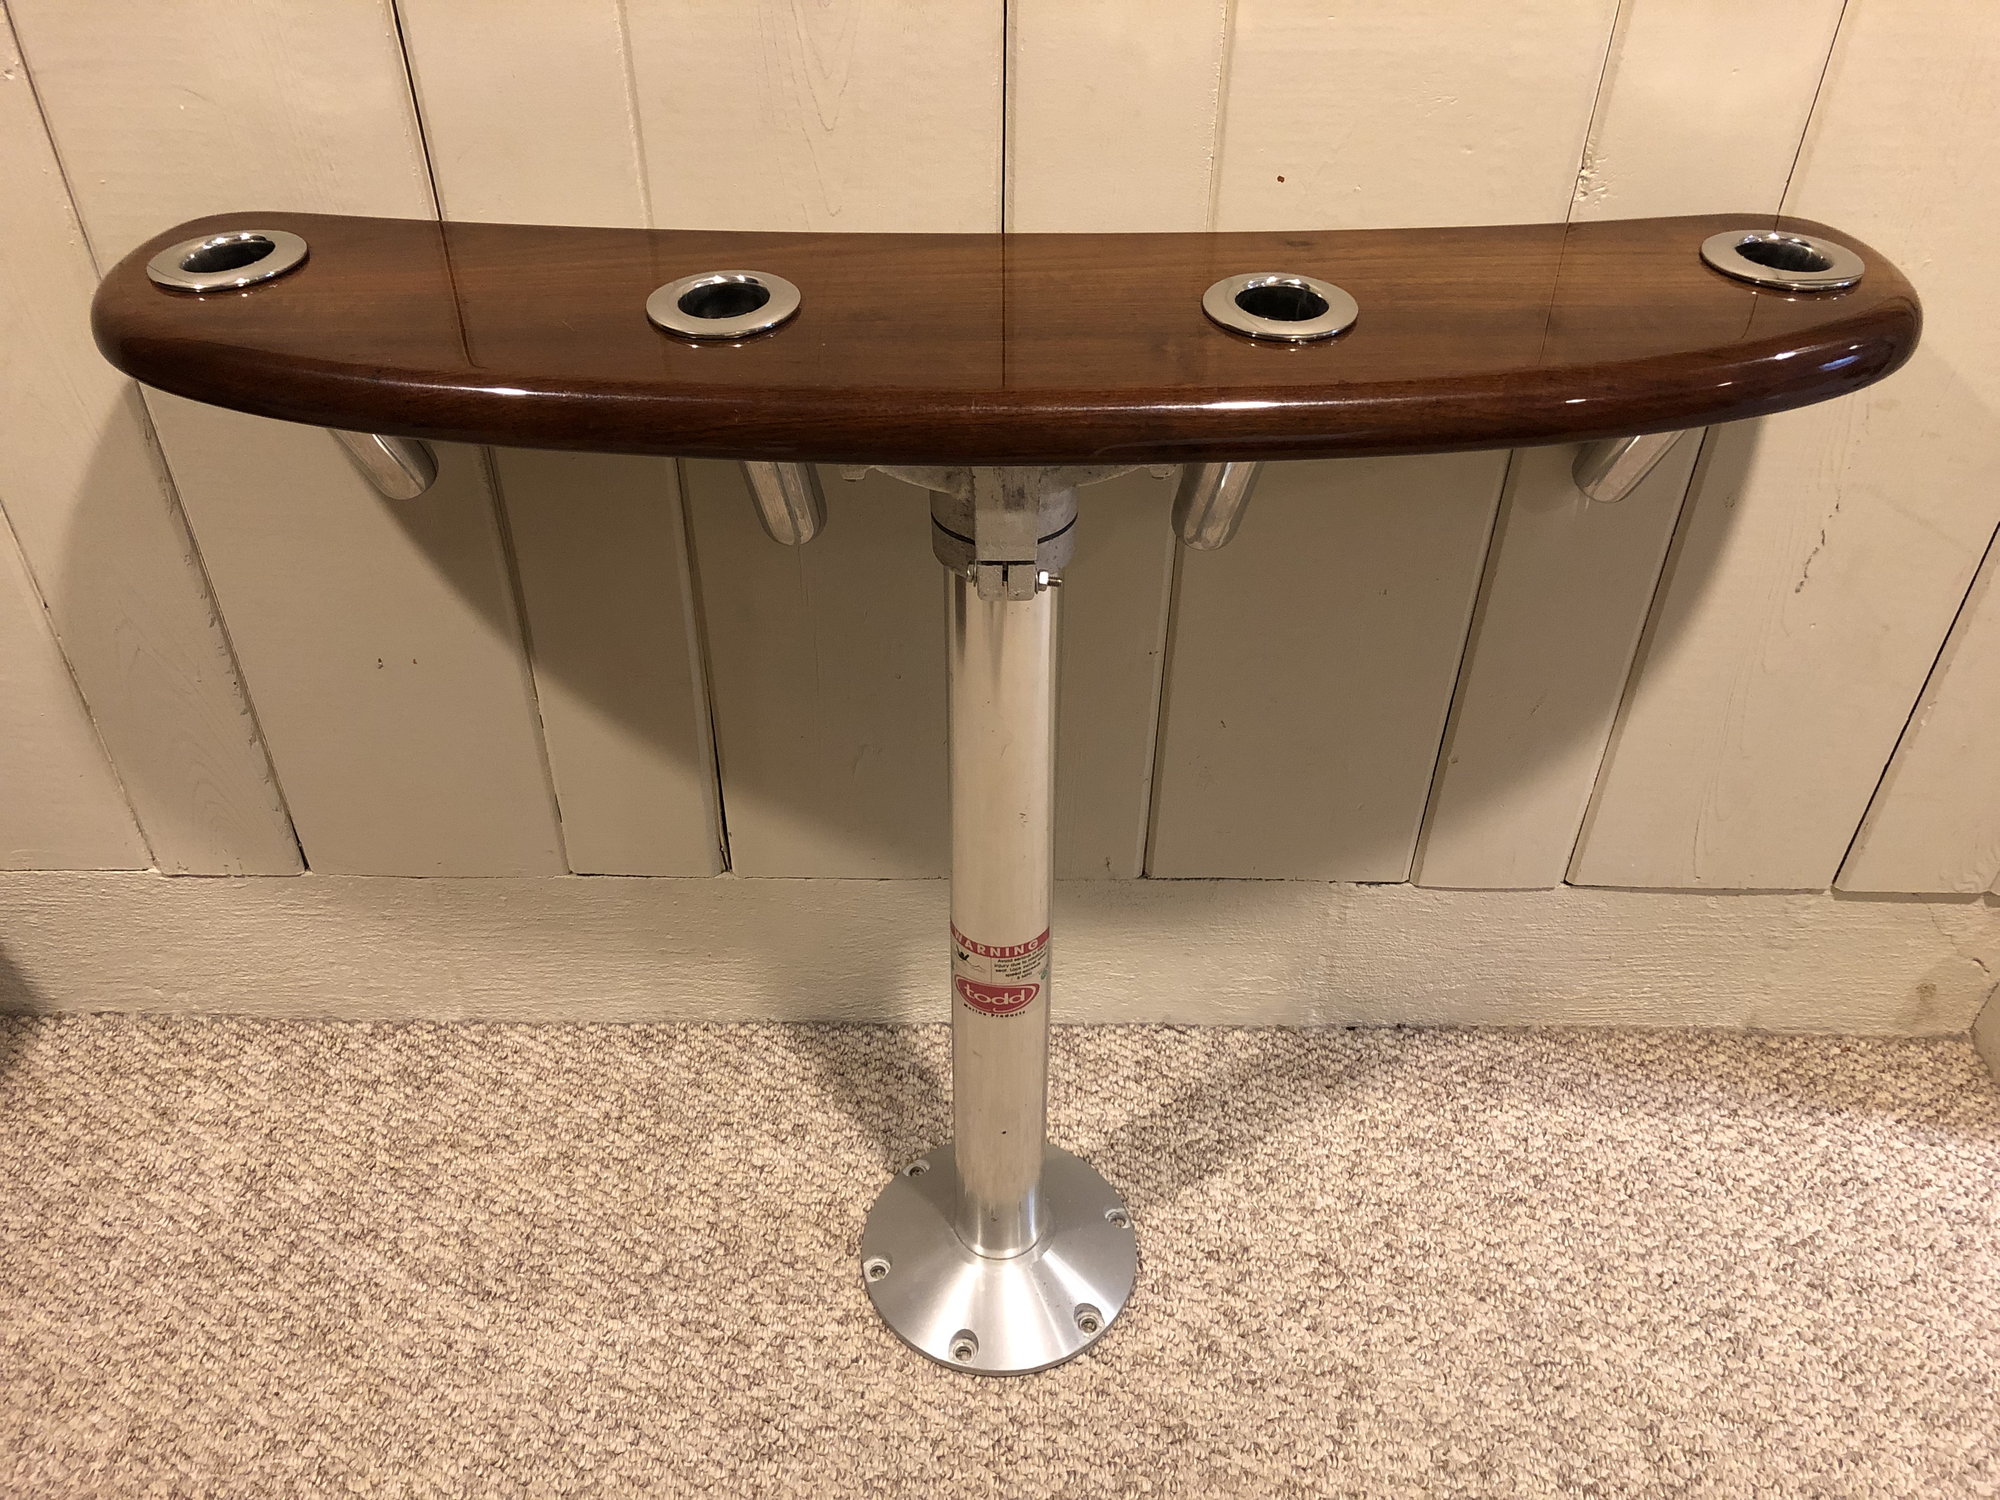 Teak Rocket Launcher Rod Holder - The Hull Truth - Boating and Fishing Forum